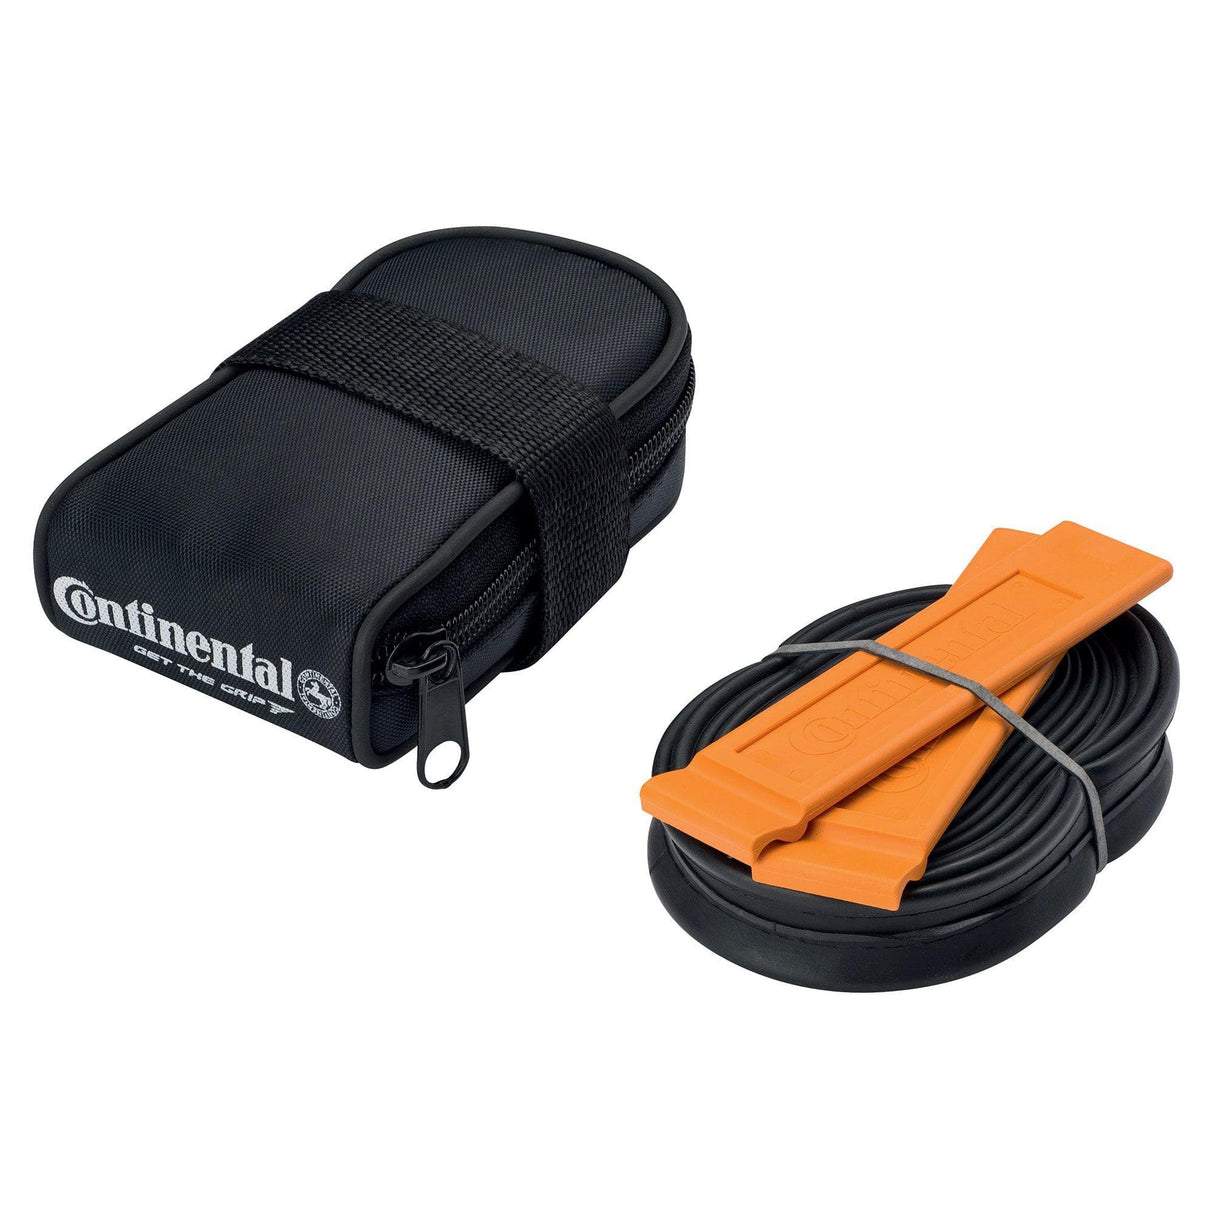 Continental Tour Saddle Bag With Tour 700 X 32-47 Dunlop 40Mm Valve Tube And 2 Tyre Levers: Black